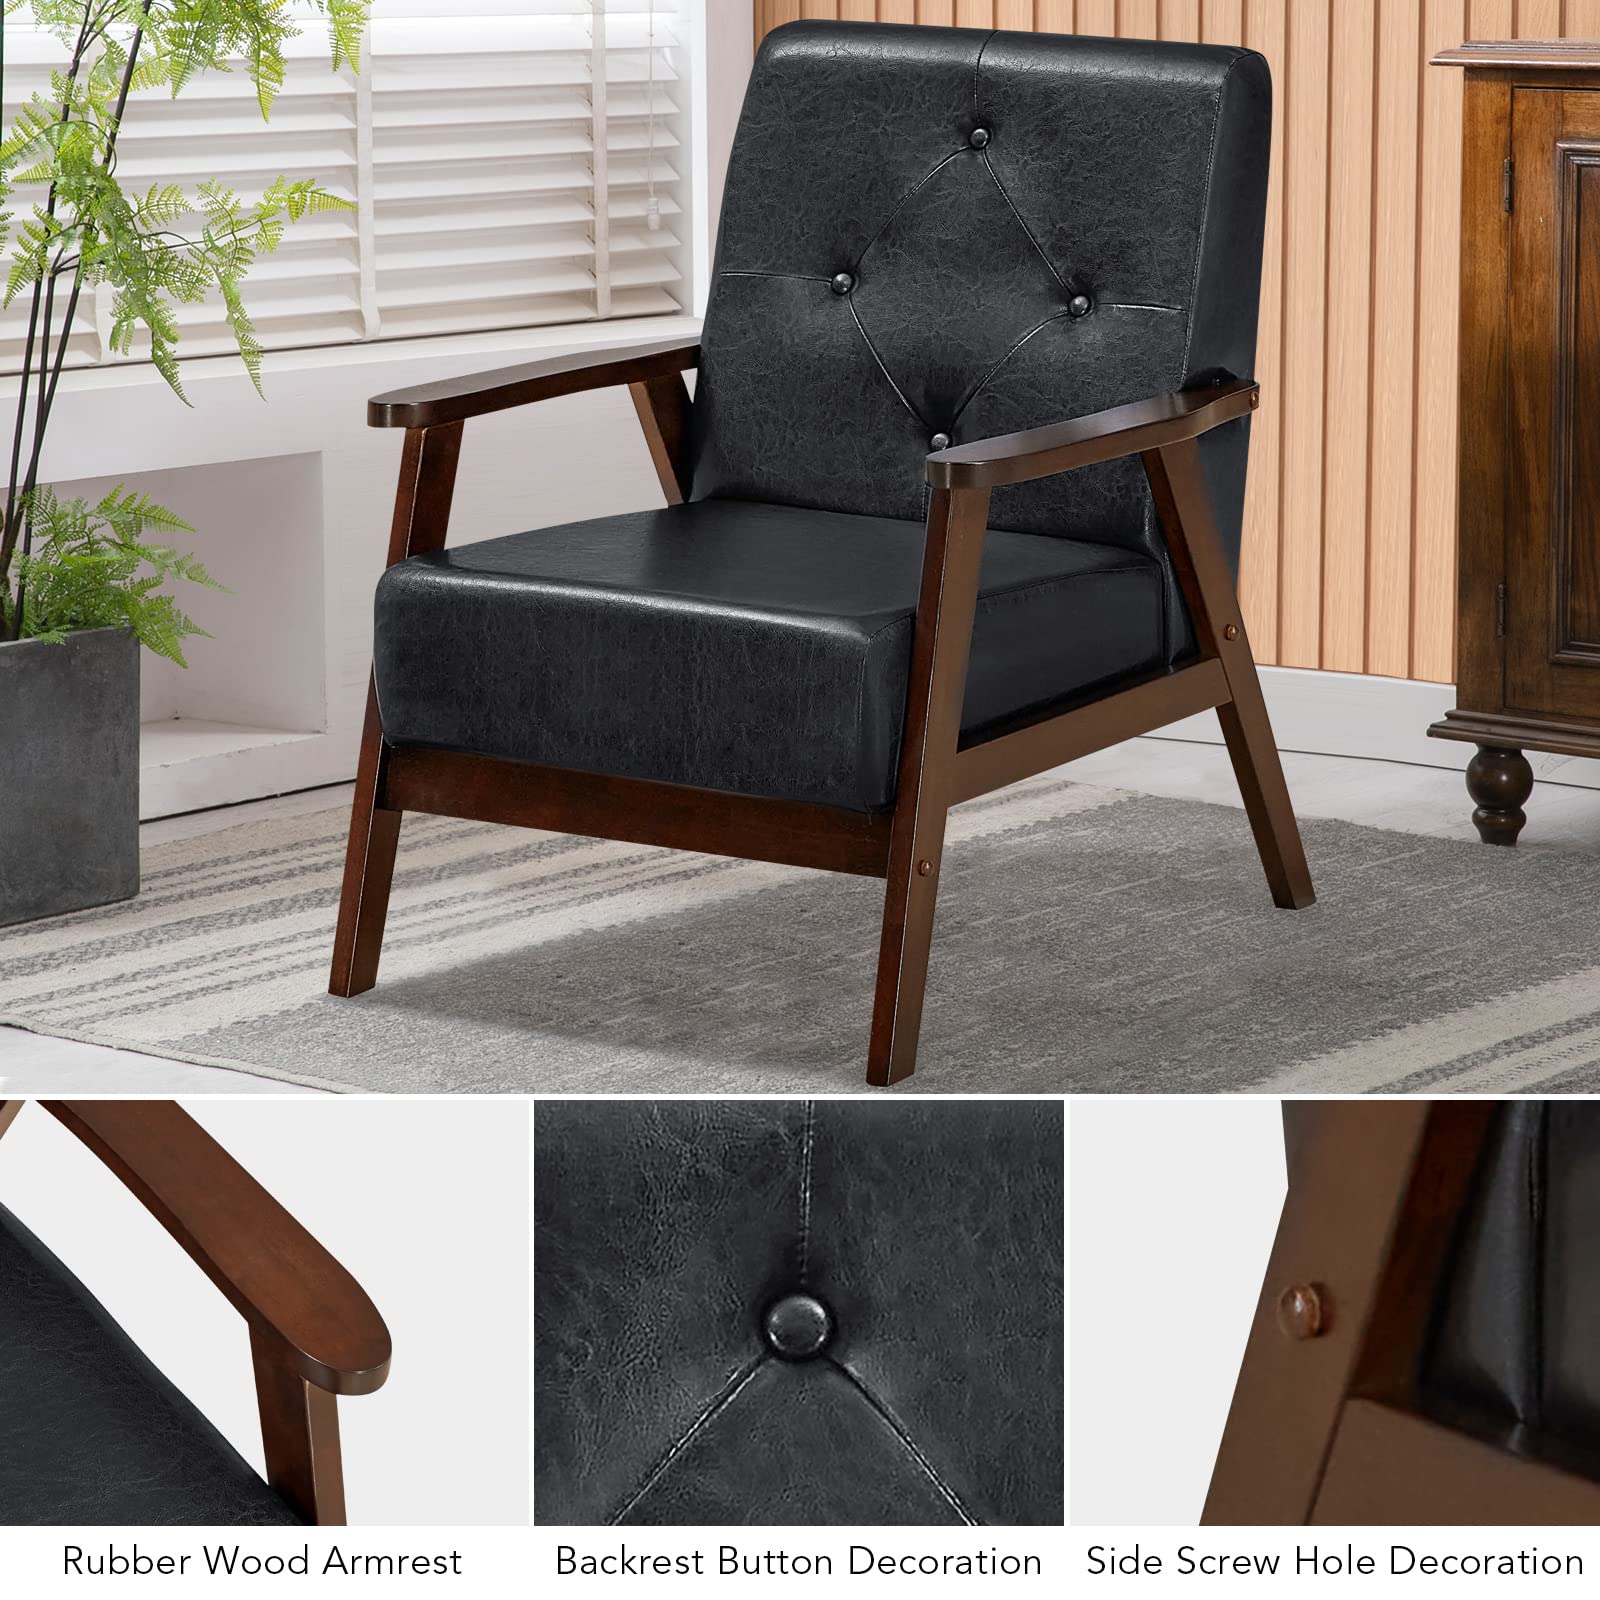 Giantex Accent Chair, Mid Century Living Room Chair, Black PU Leather Armchair